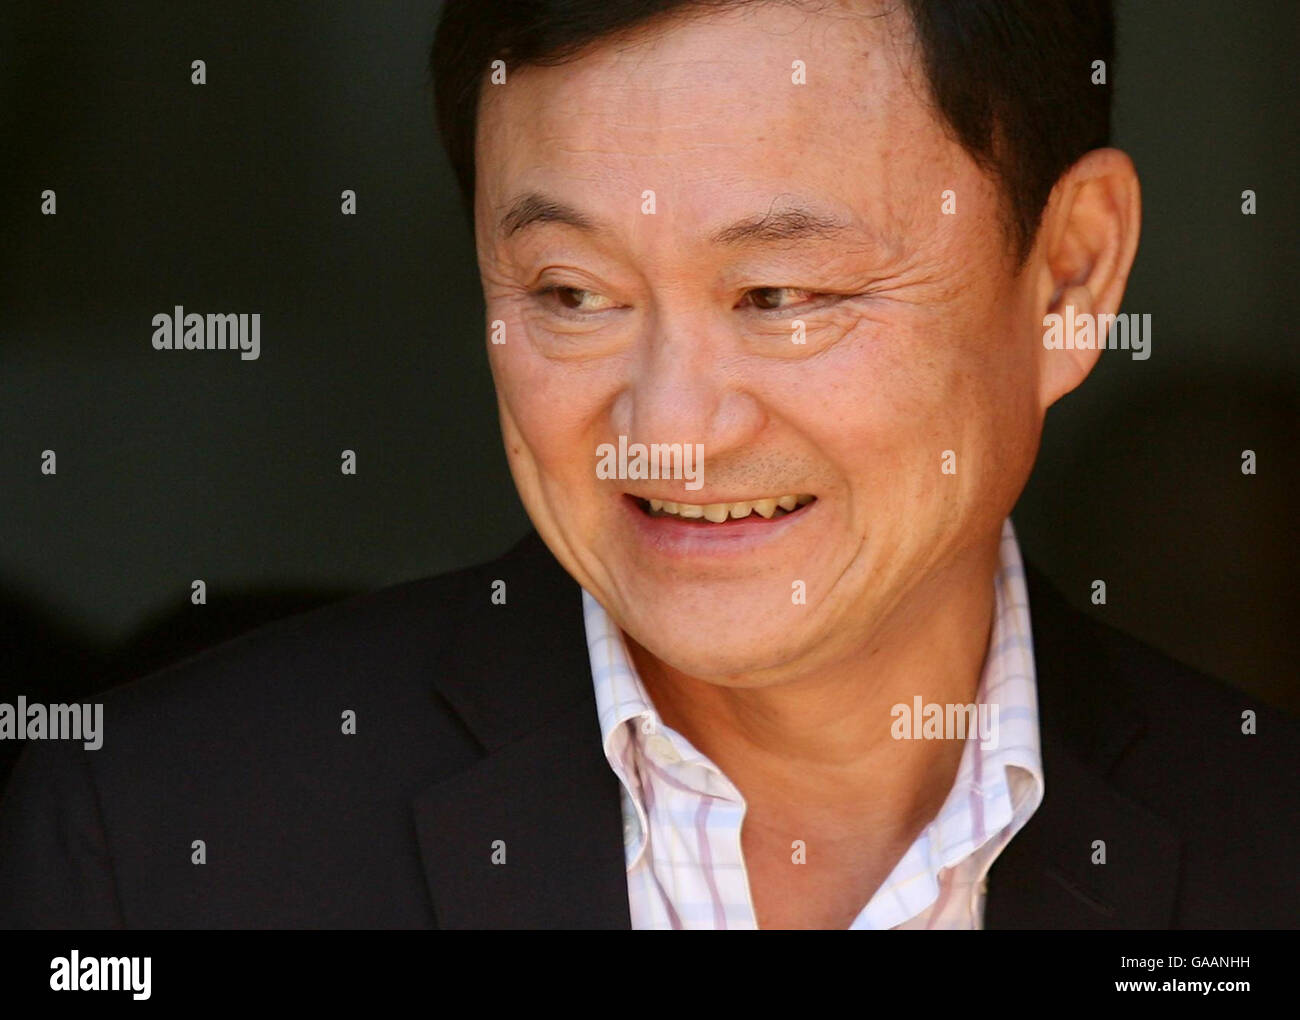 Dr. Thaksin Shinawatra, former Prime Minister of Thailand arrives at the Dhammakaya Centre for Buddhist Meditation in Knaphill, Surrey, a year after being ousted from office. Stock Photo